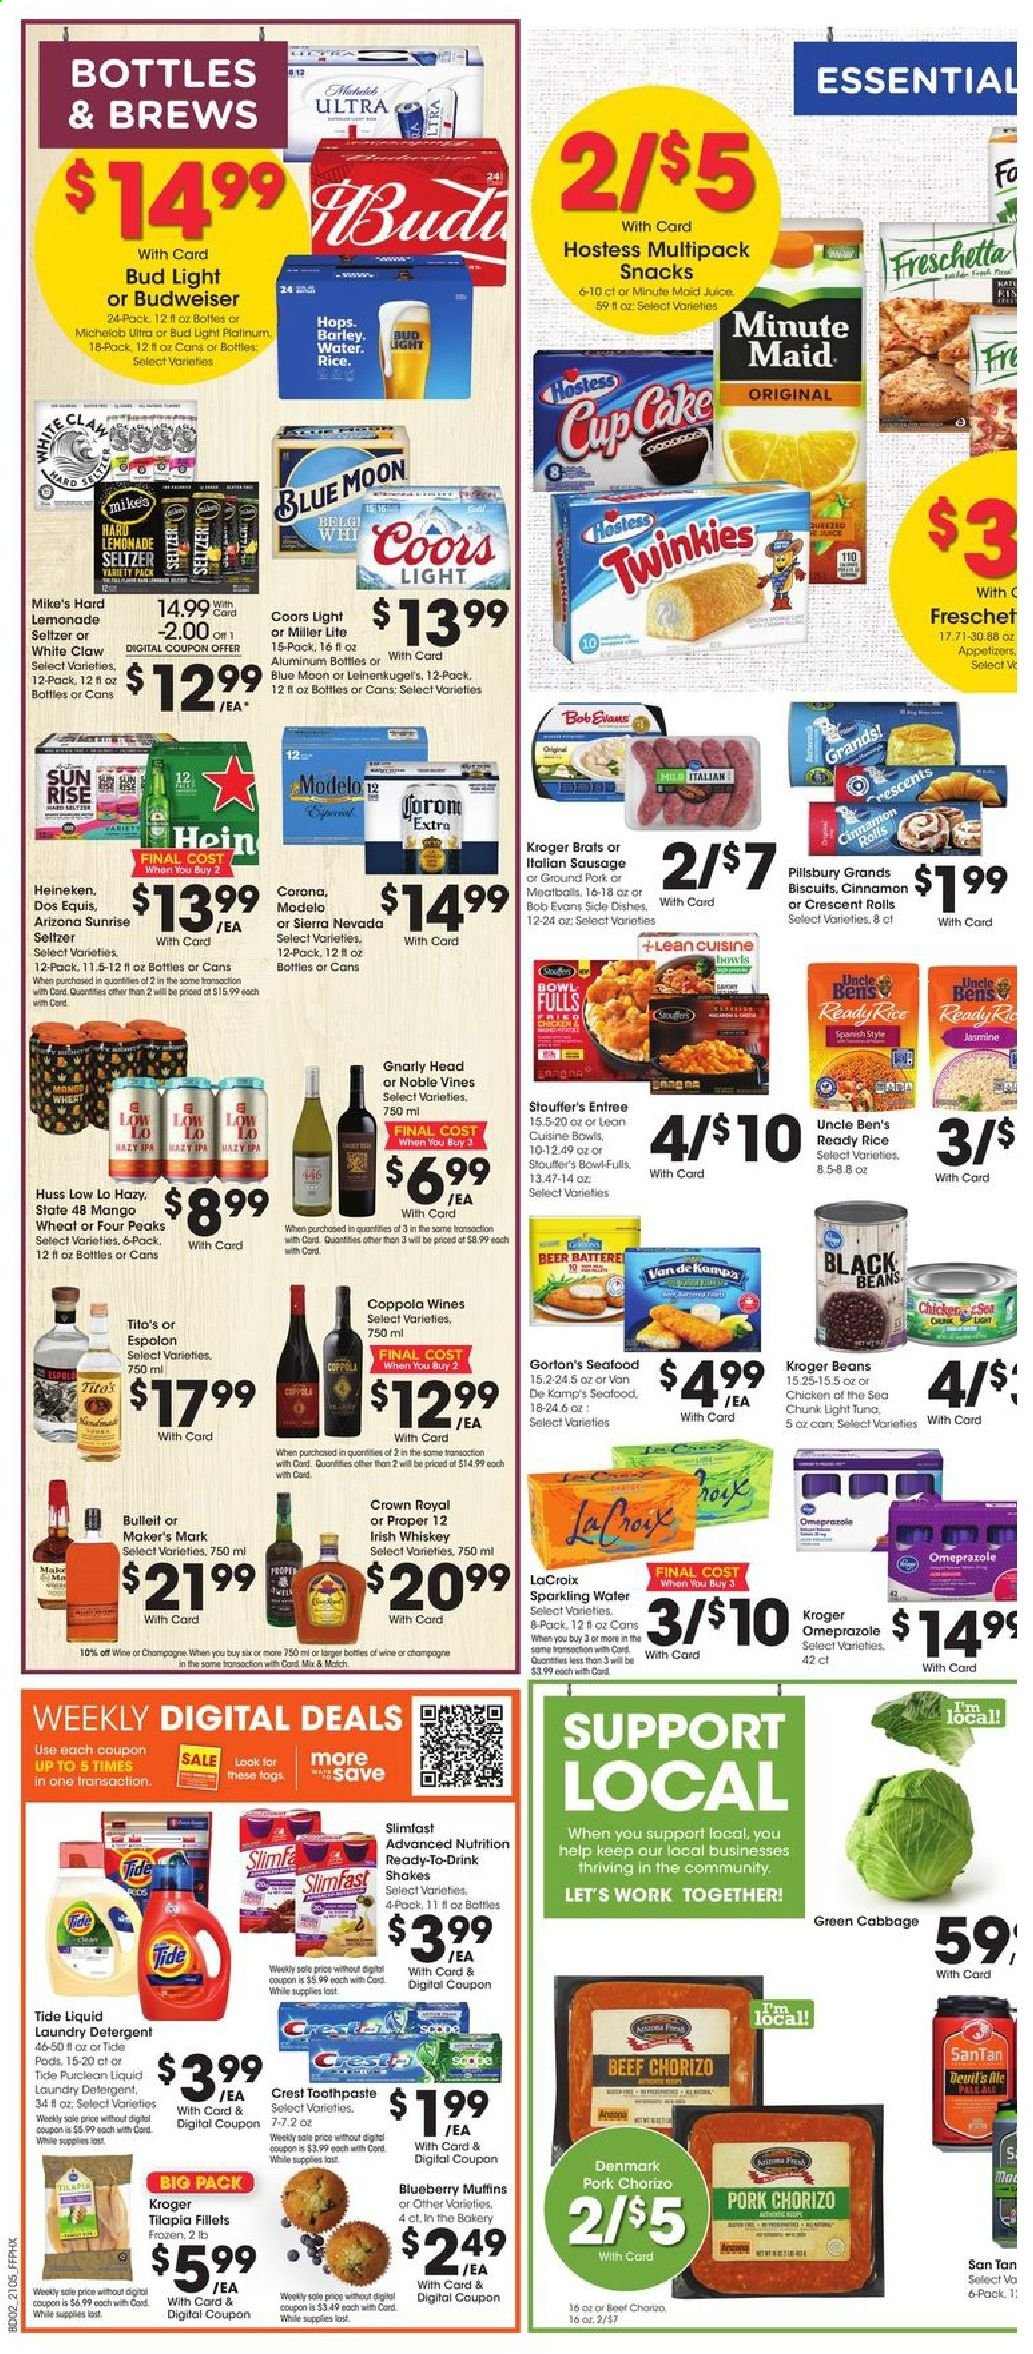 thumbnail - Fry’s Flyer - 03/03/2021 - 03/09/2021 - Sales products - cinnamon roll, crescent rolls, muffin, tilapia, seafood, Van de Kamp's, Gorton's, meatballs, Pillsbury, Lean Cuisine, Slimfast, Bob Evans, chorizo, sausage, italian sausage, shake, beans, mango, Stouffer's, biscuit, snack, light tuna, Uncle Ben's, Chicken of the Sea, lemonade, juice, AriZona, seltzer water, sparkling water, champagne, wine, whiskey, White Claw, beer, Budweiser, Miller Lite, Coors, Dos Equis, Blue Moon, Michelob, Bud Light, Corona Extra, Heineken, IPA, Modelo, ground pork, detergent, Tide, laundry detergent, toothpaste, Crest. Page 4.